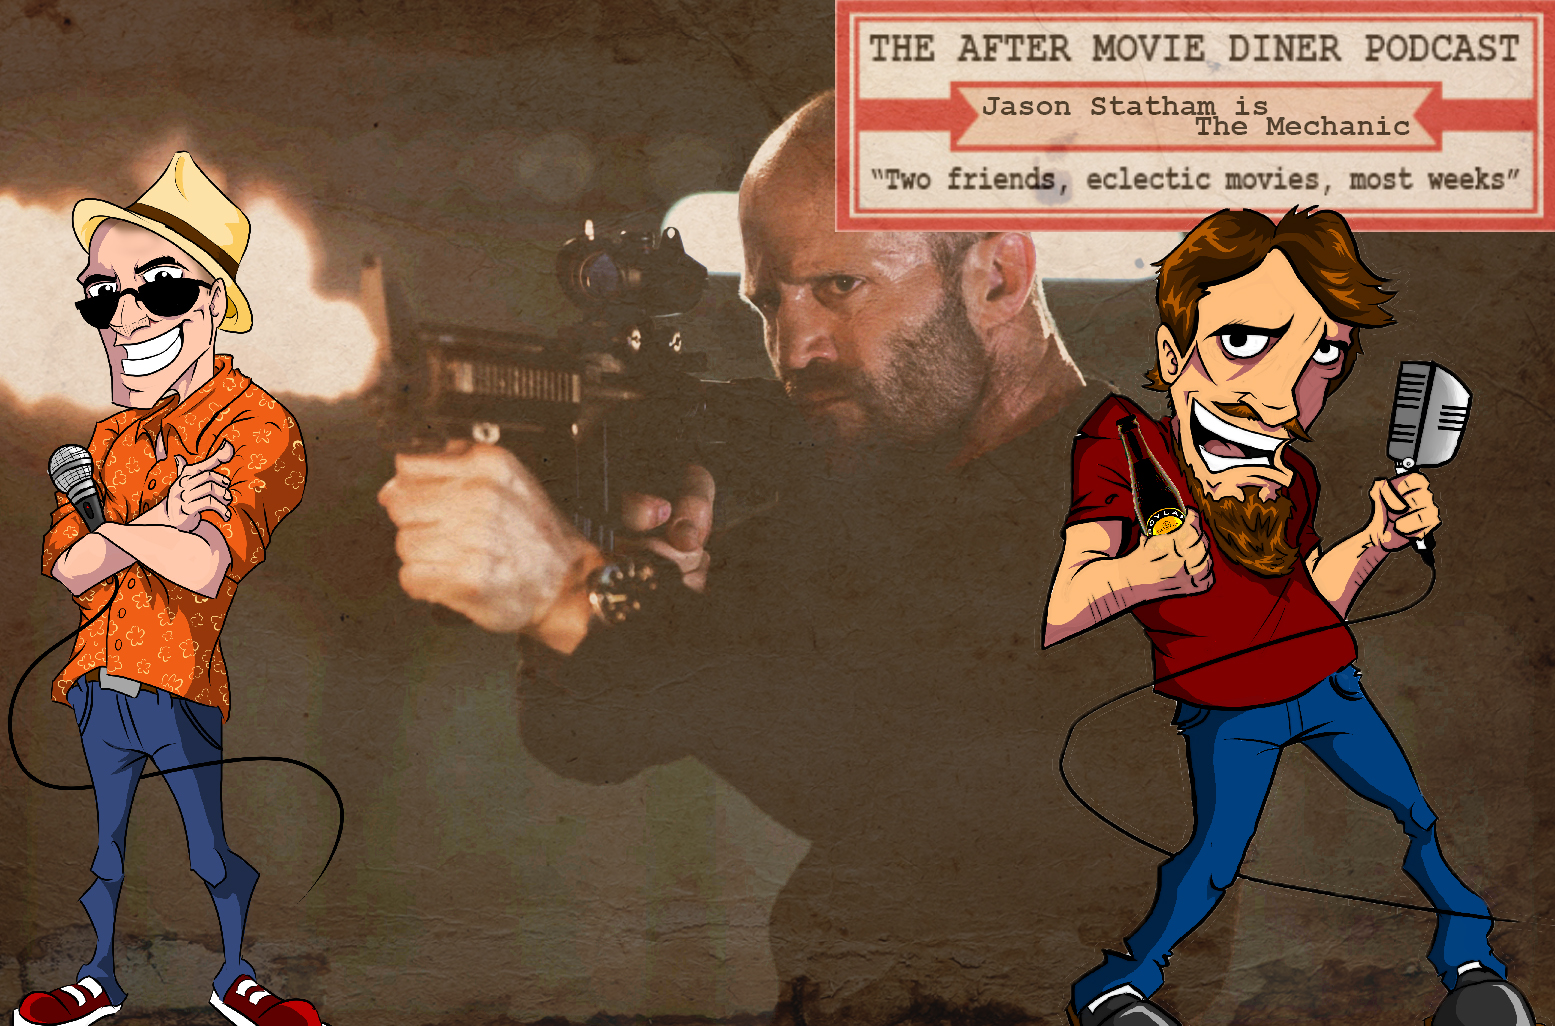 Episode 198 - Jason Statham is The Mechanic — The After Movie Diner